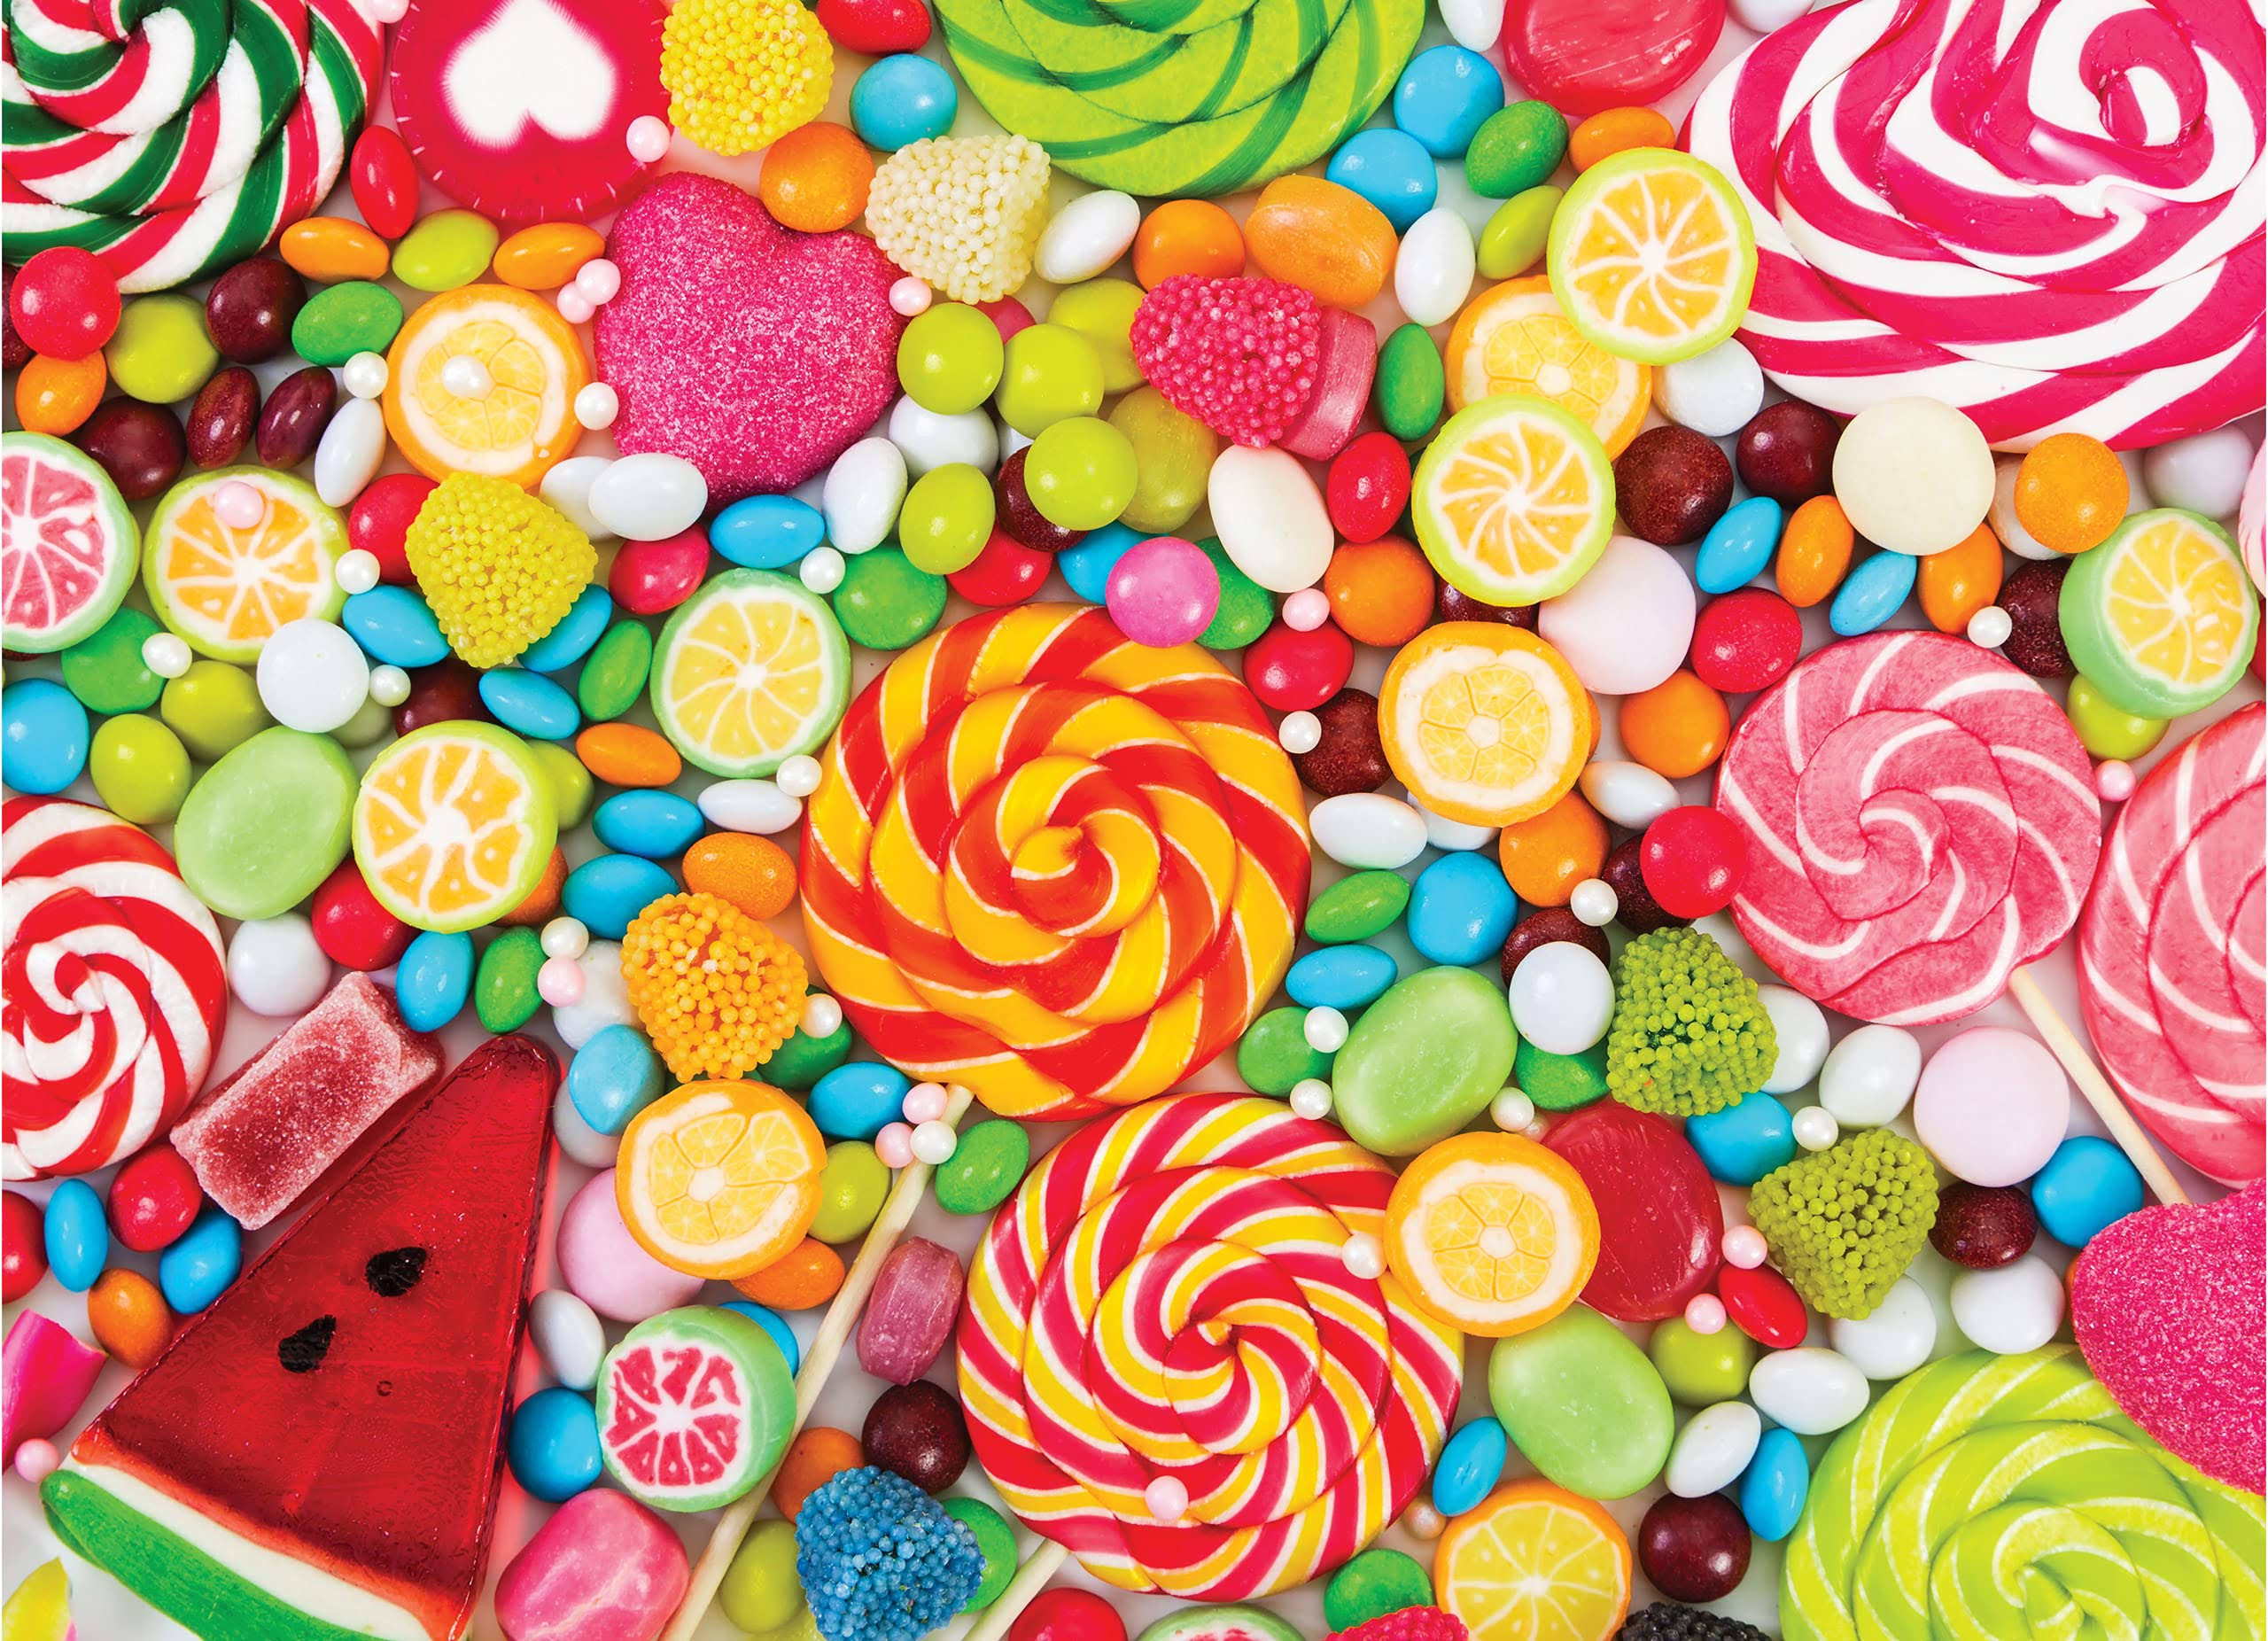 All The Candy 500 Piece Jigsaw Puzzle